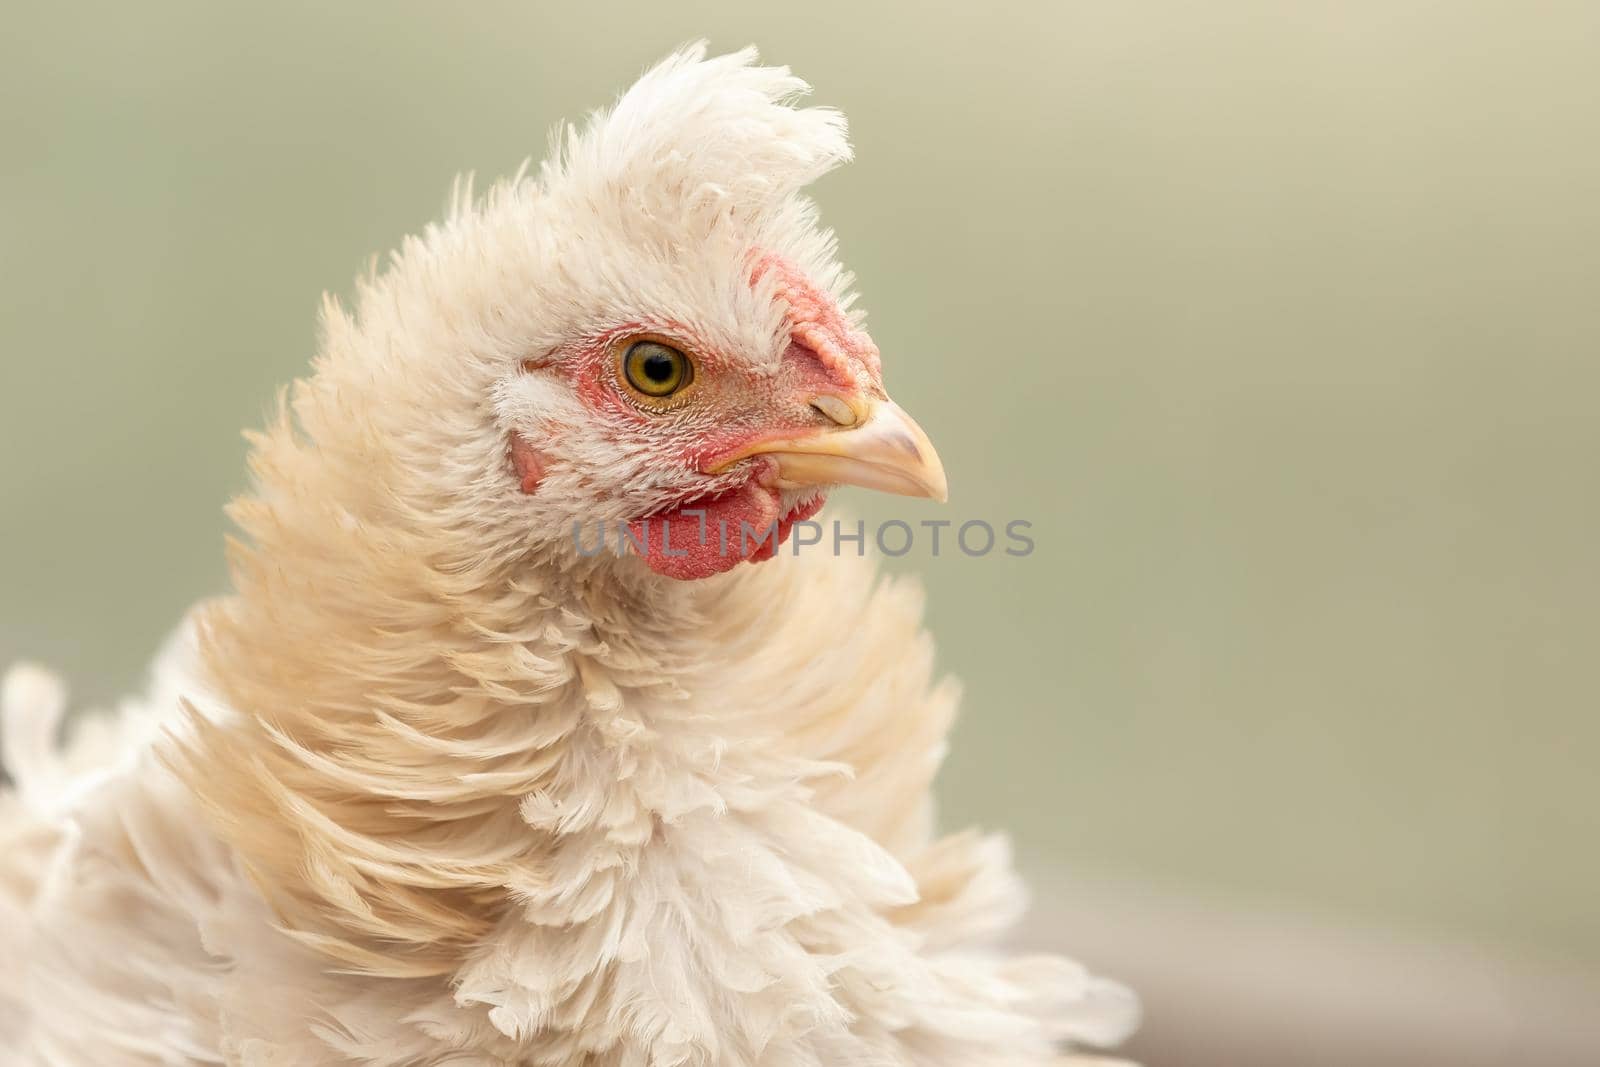 Horizontal portrait, of creamy white colour chicken with a fluffy tuft, in a light green blurred background.